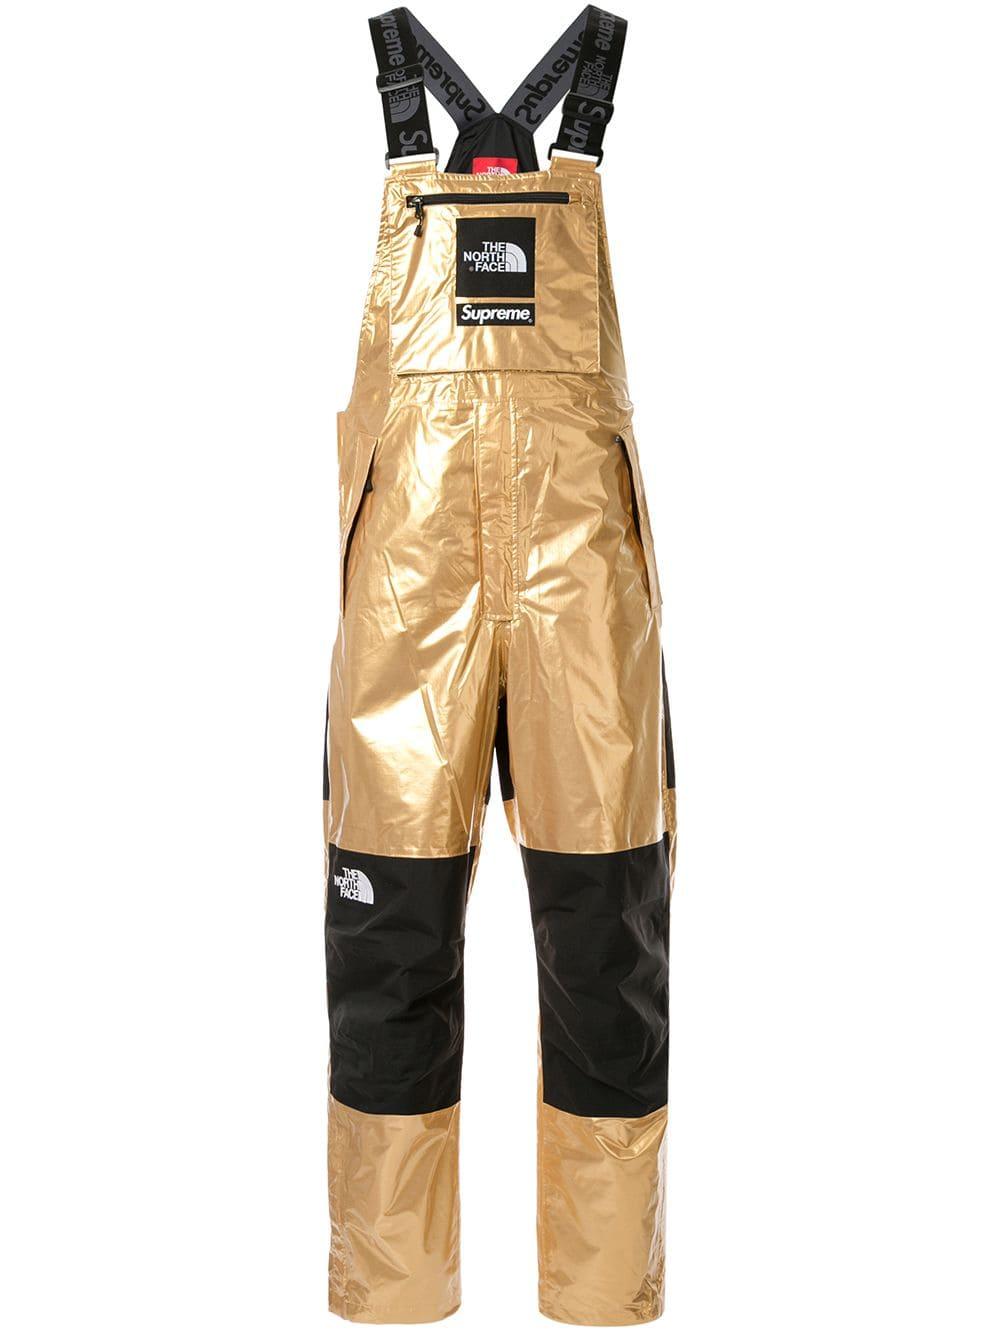 Supreme The North Face X Dungarees in Gold (Metallic) for Men - Lyst